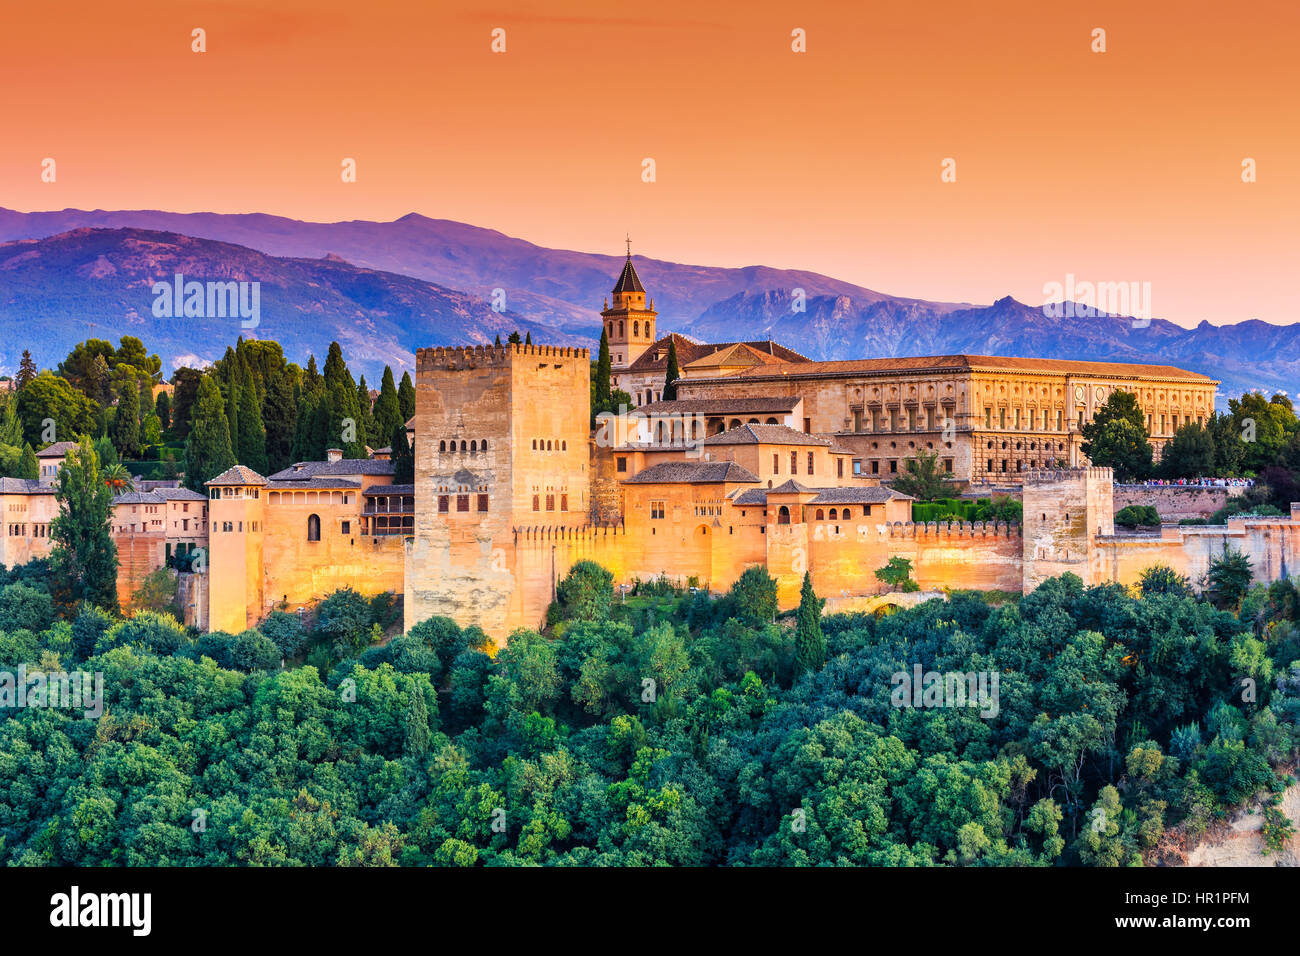 Alhambra of Granada, Spain. Alhambra fortress at sunset. Stock Photo